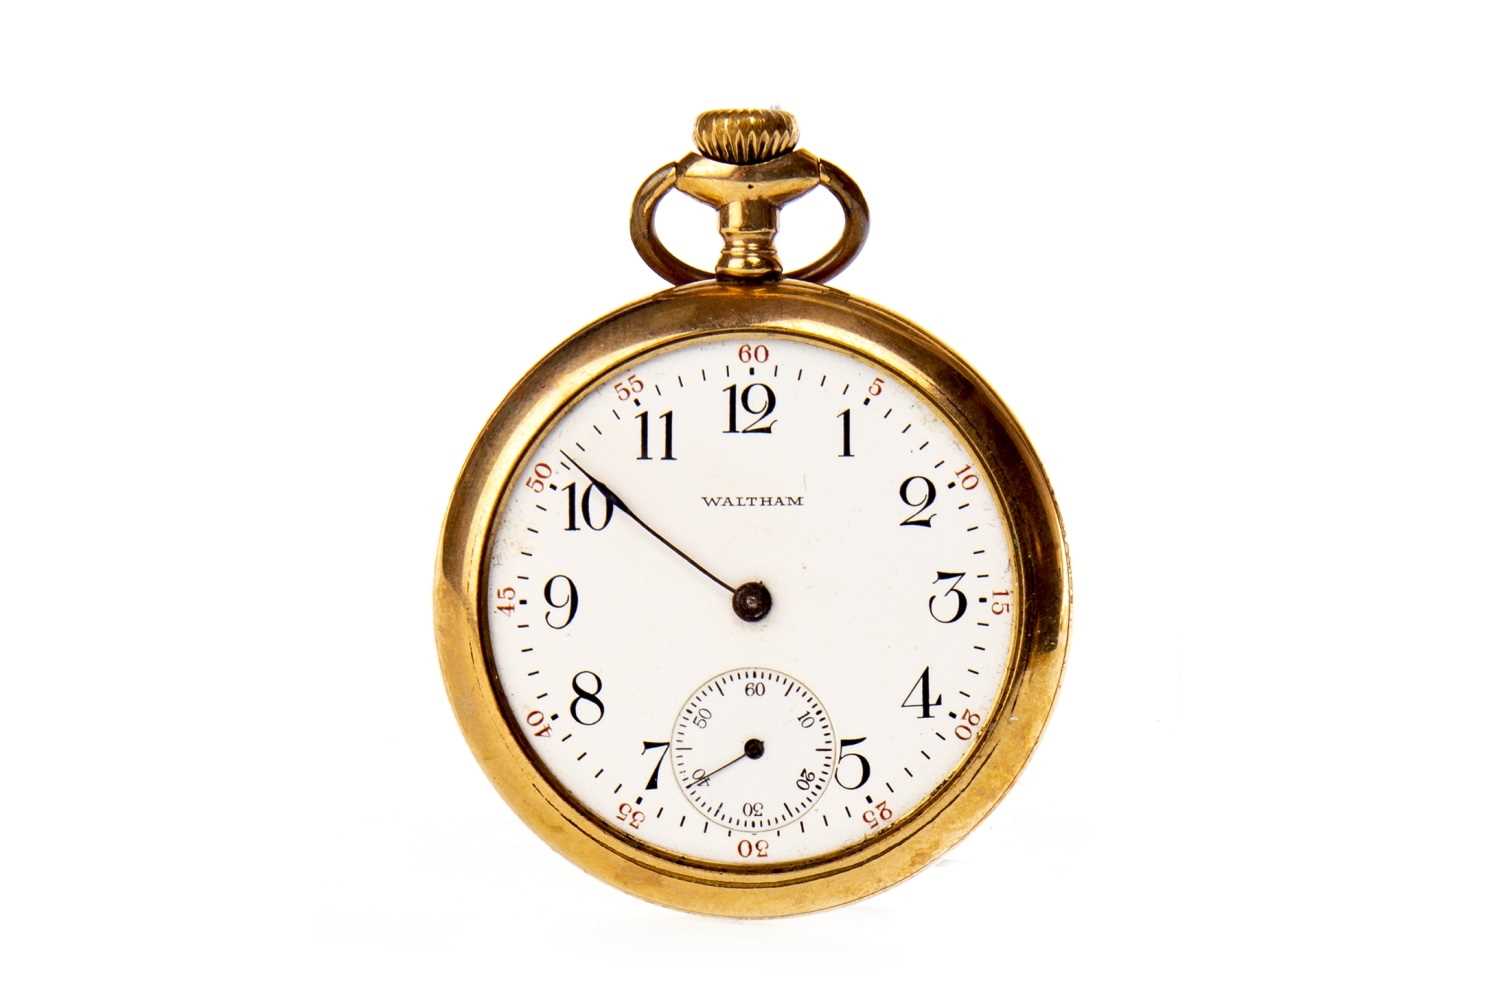 Lot 815 - A WALTHAM GOLD PLATED POCKET WATCH